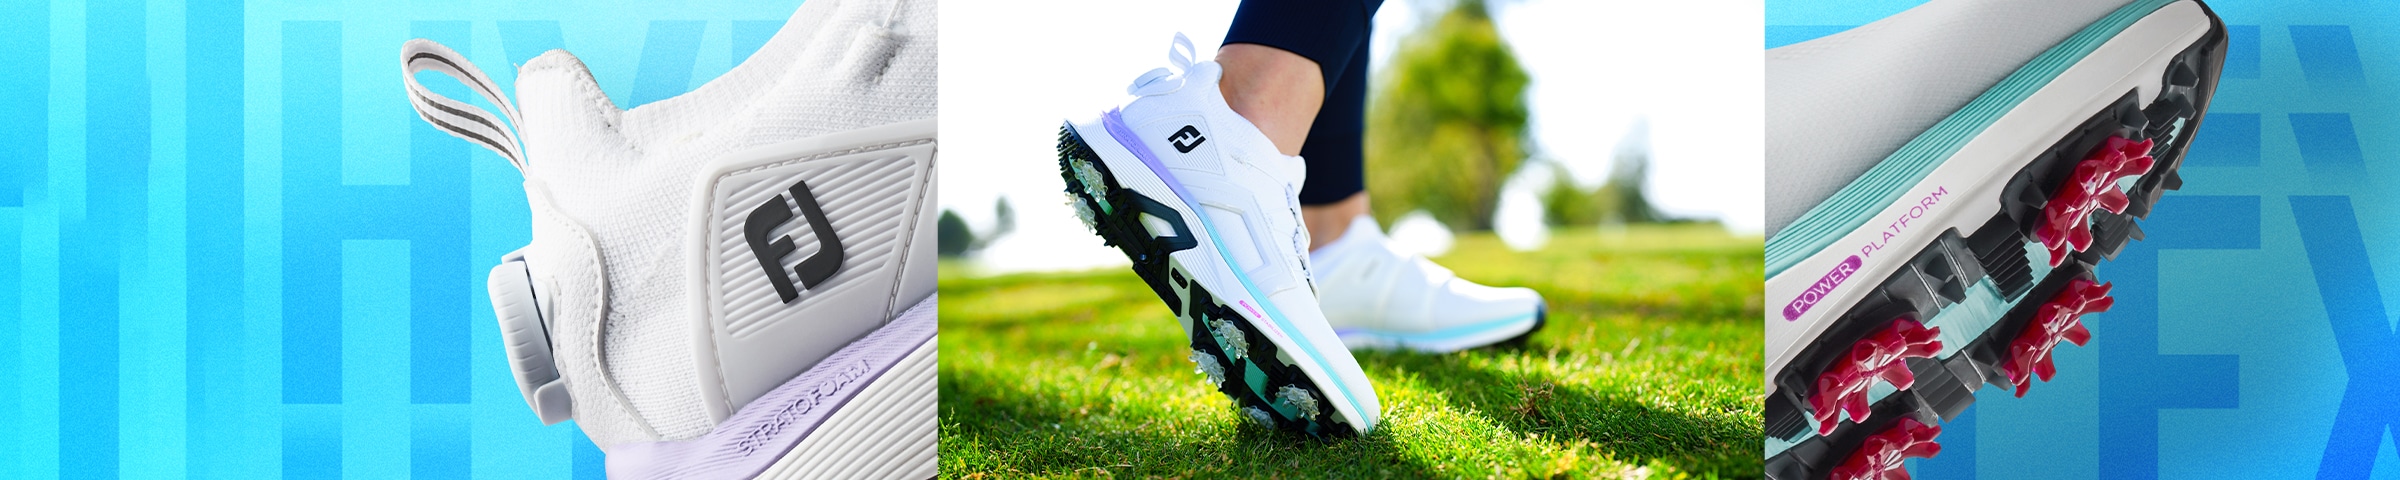 FootJoy Womens Spiked Golf Shoes